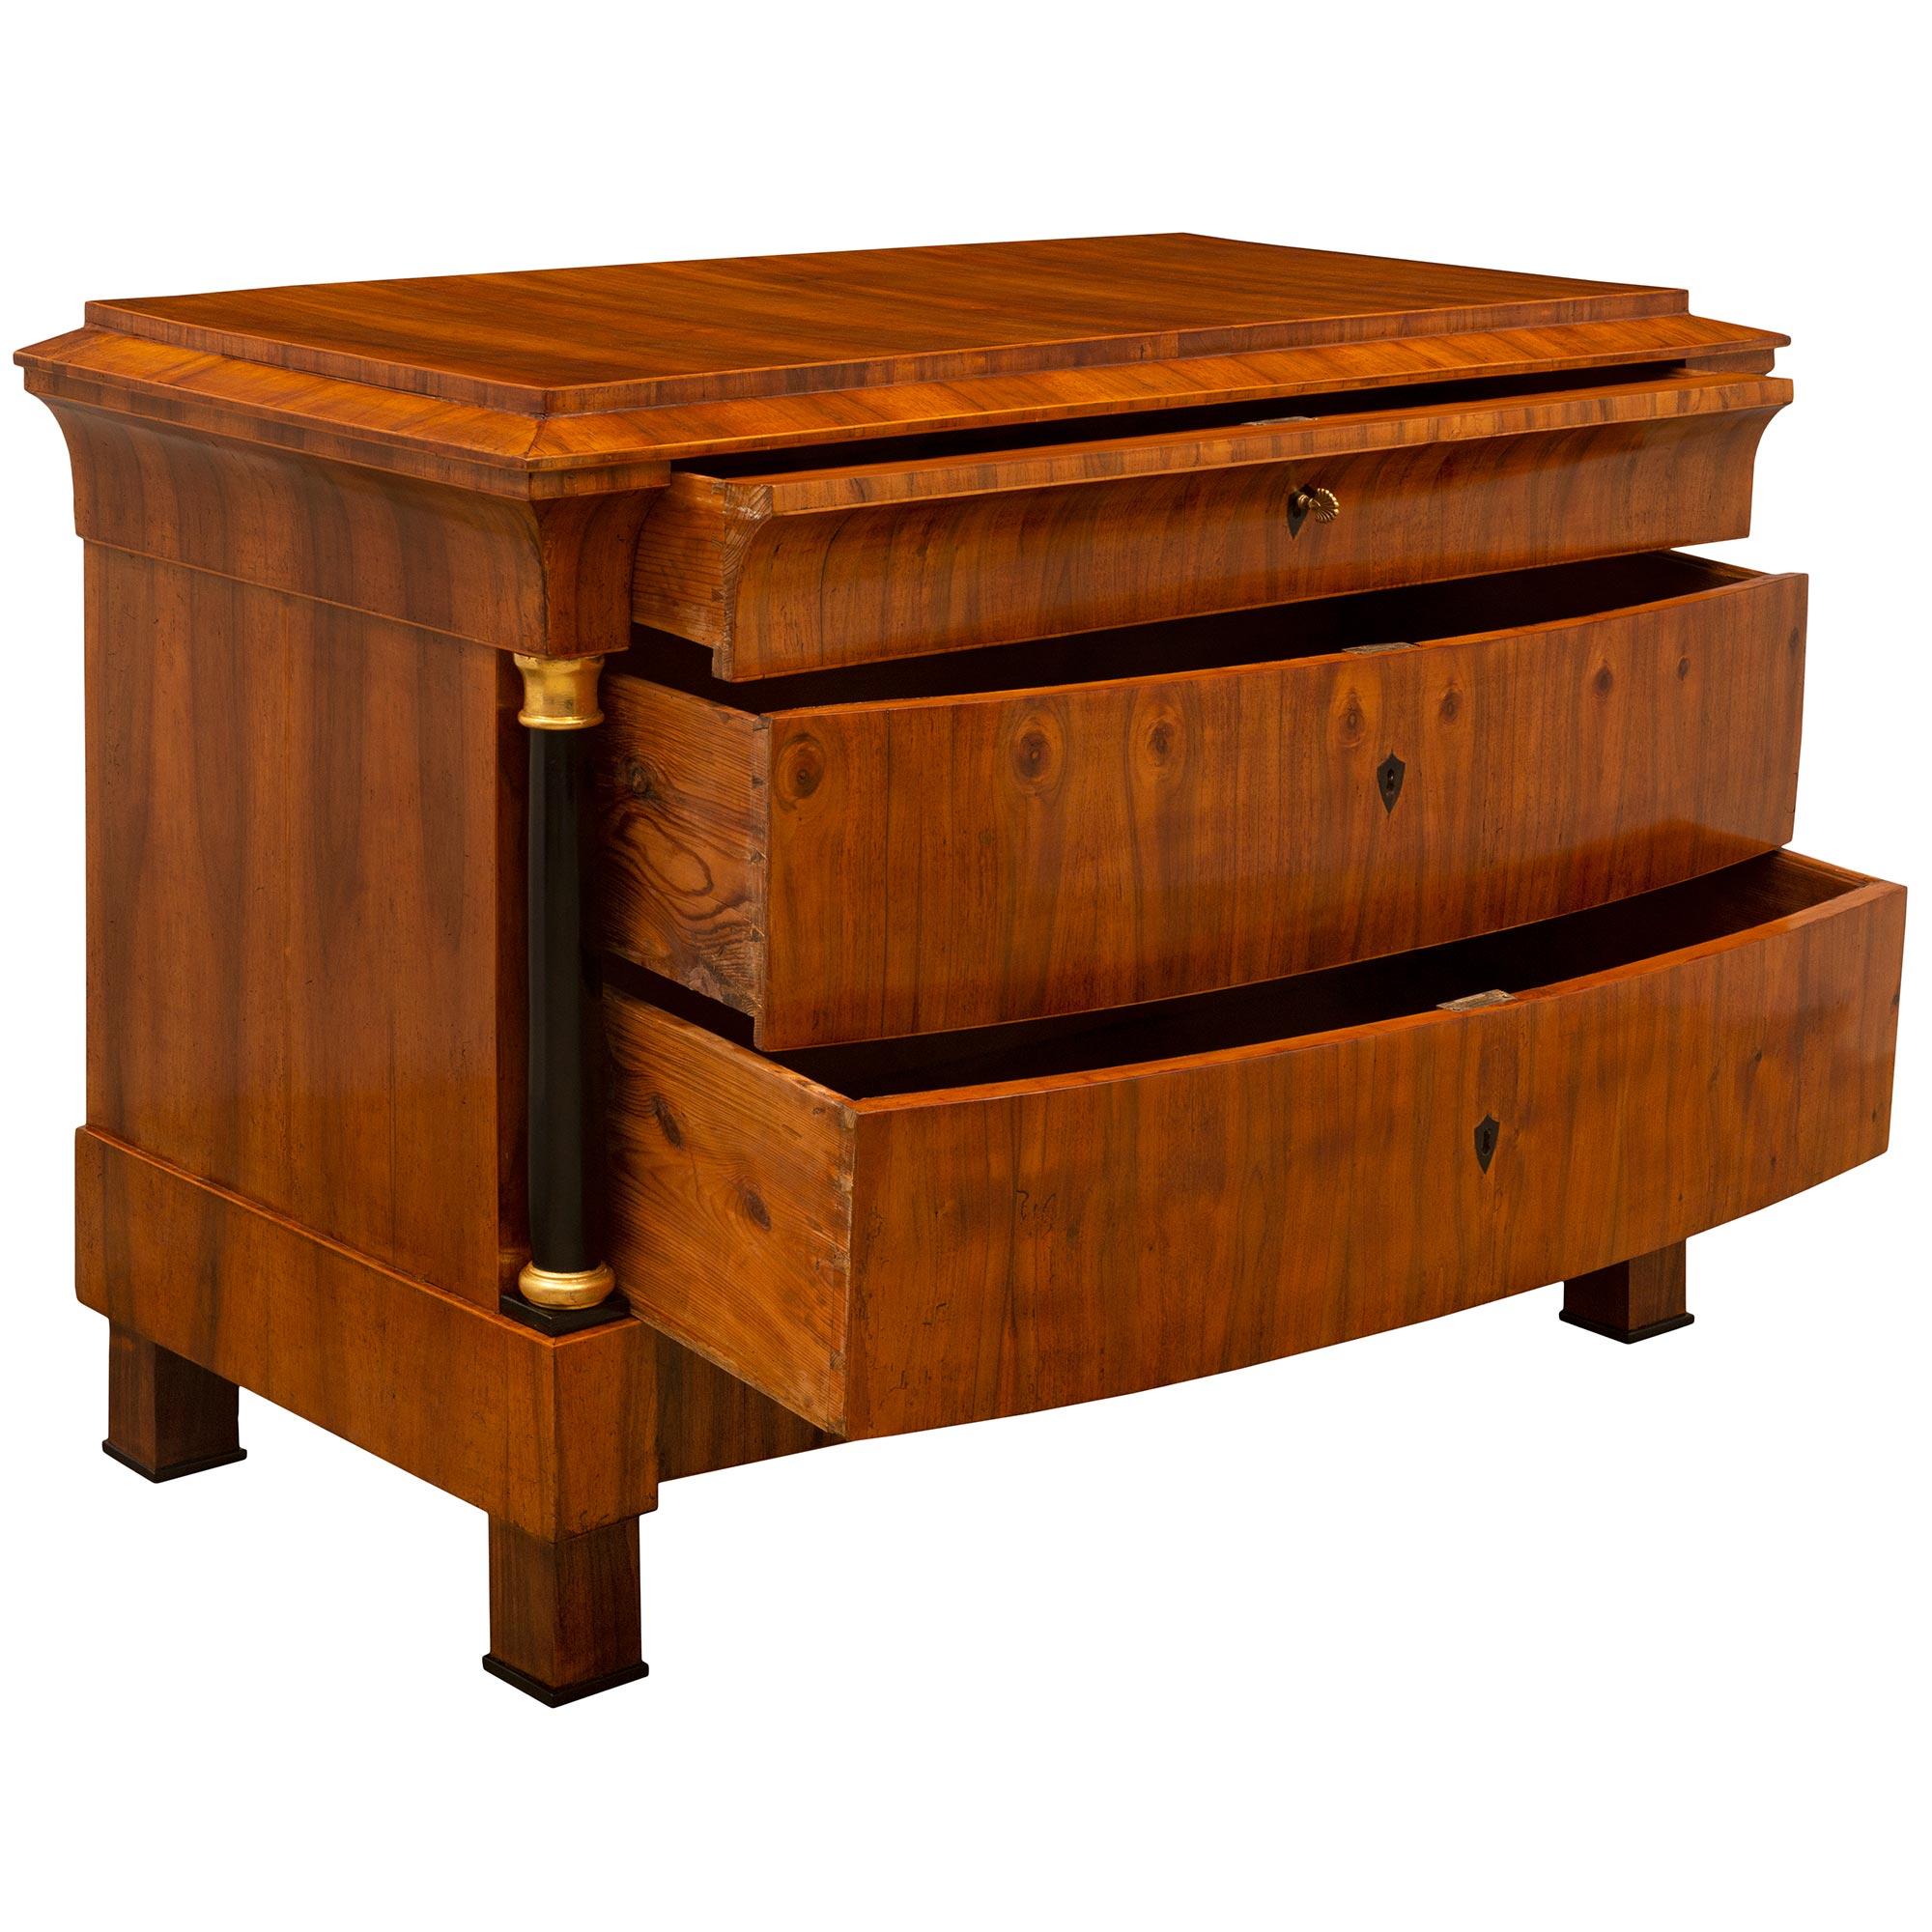 Unknown Continental 19th Century Biedermeier Period Walnut & Fruitwood Commode For Sale